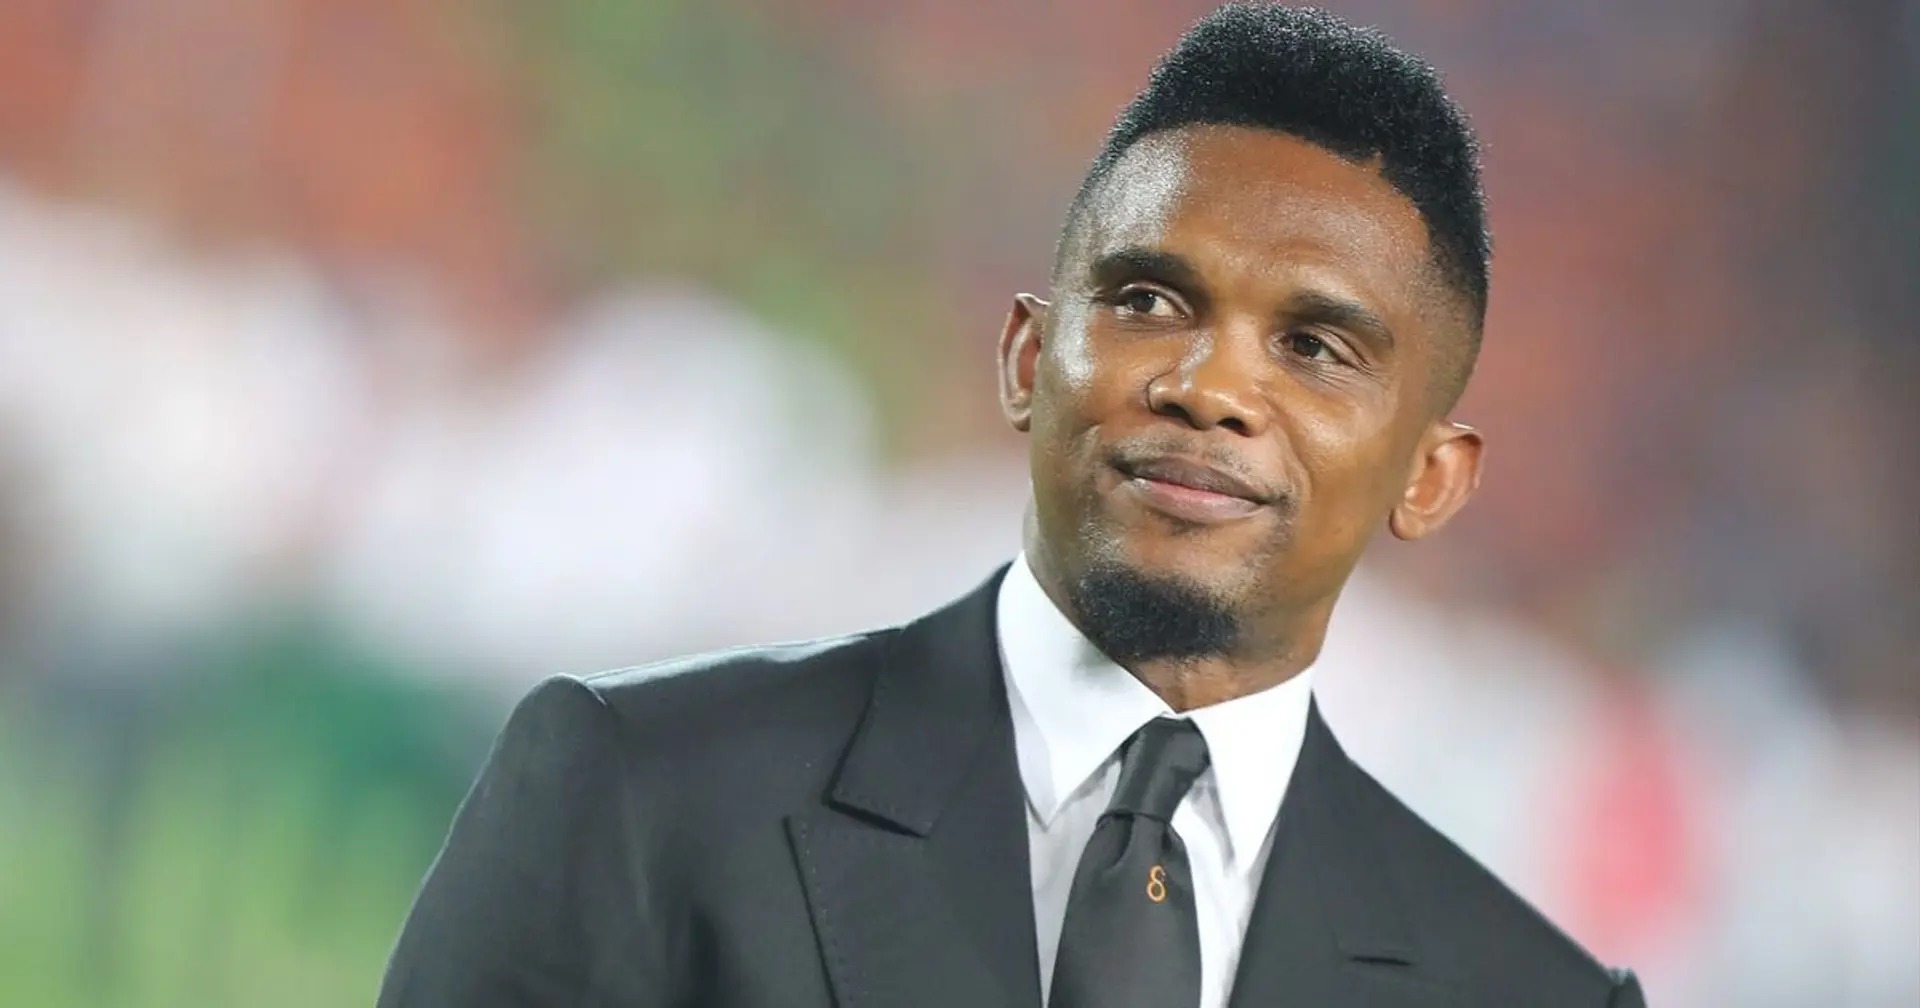 Eto'o sentenced to 22 months of suspended prison after admitting to tax fraud during Barca period